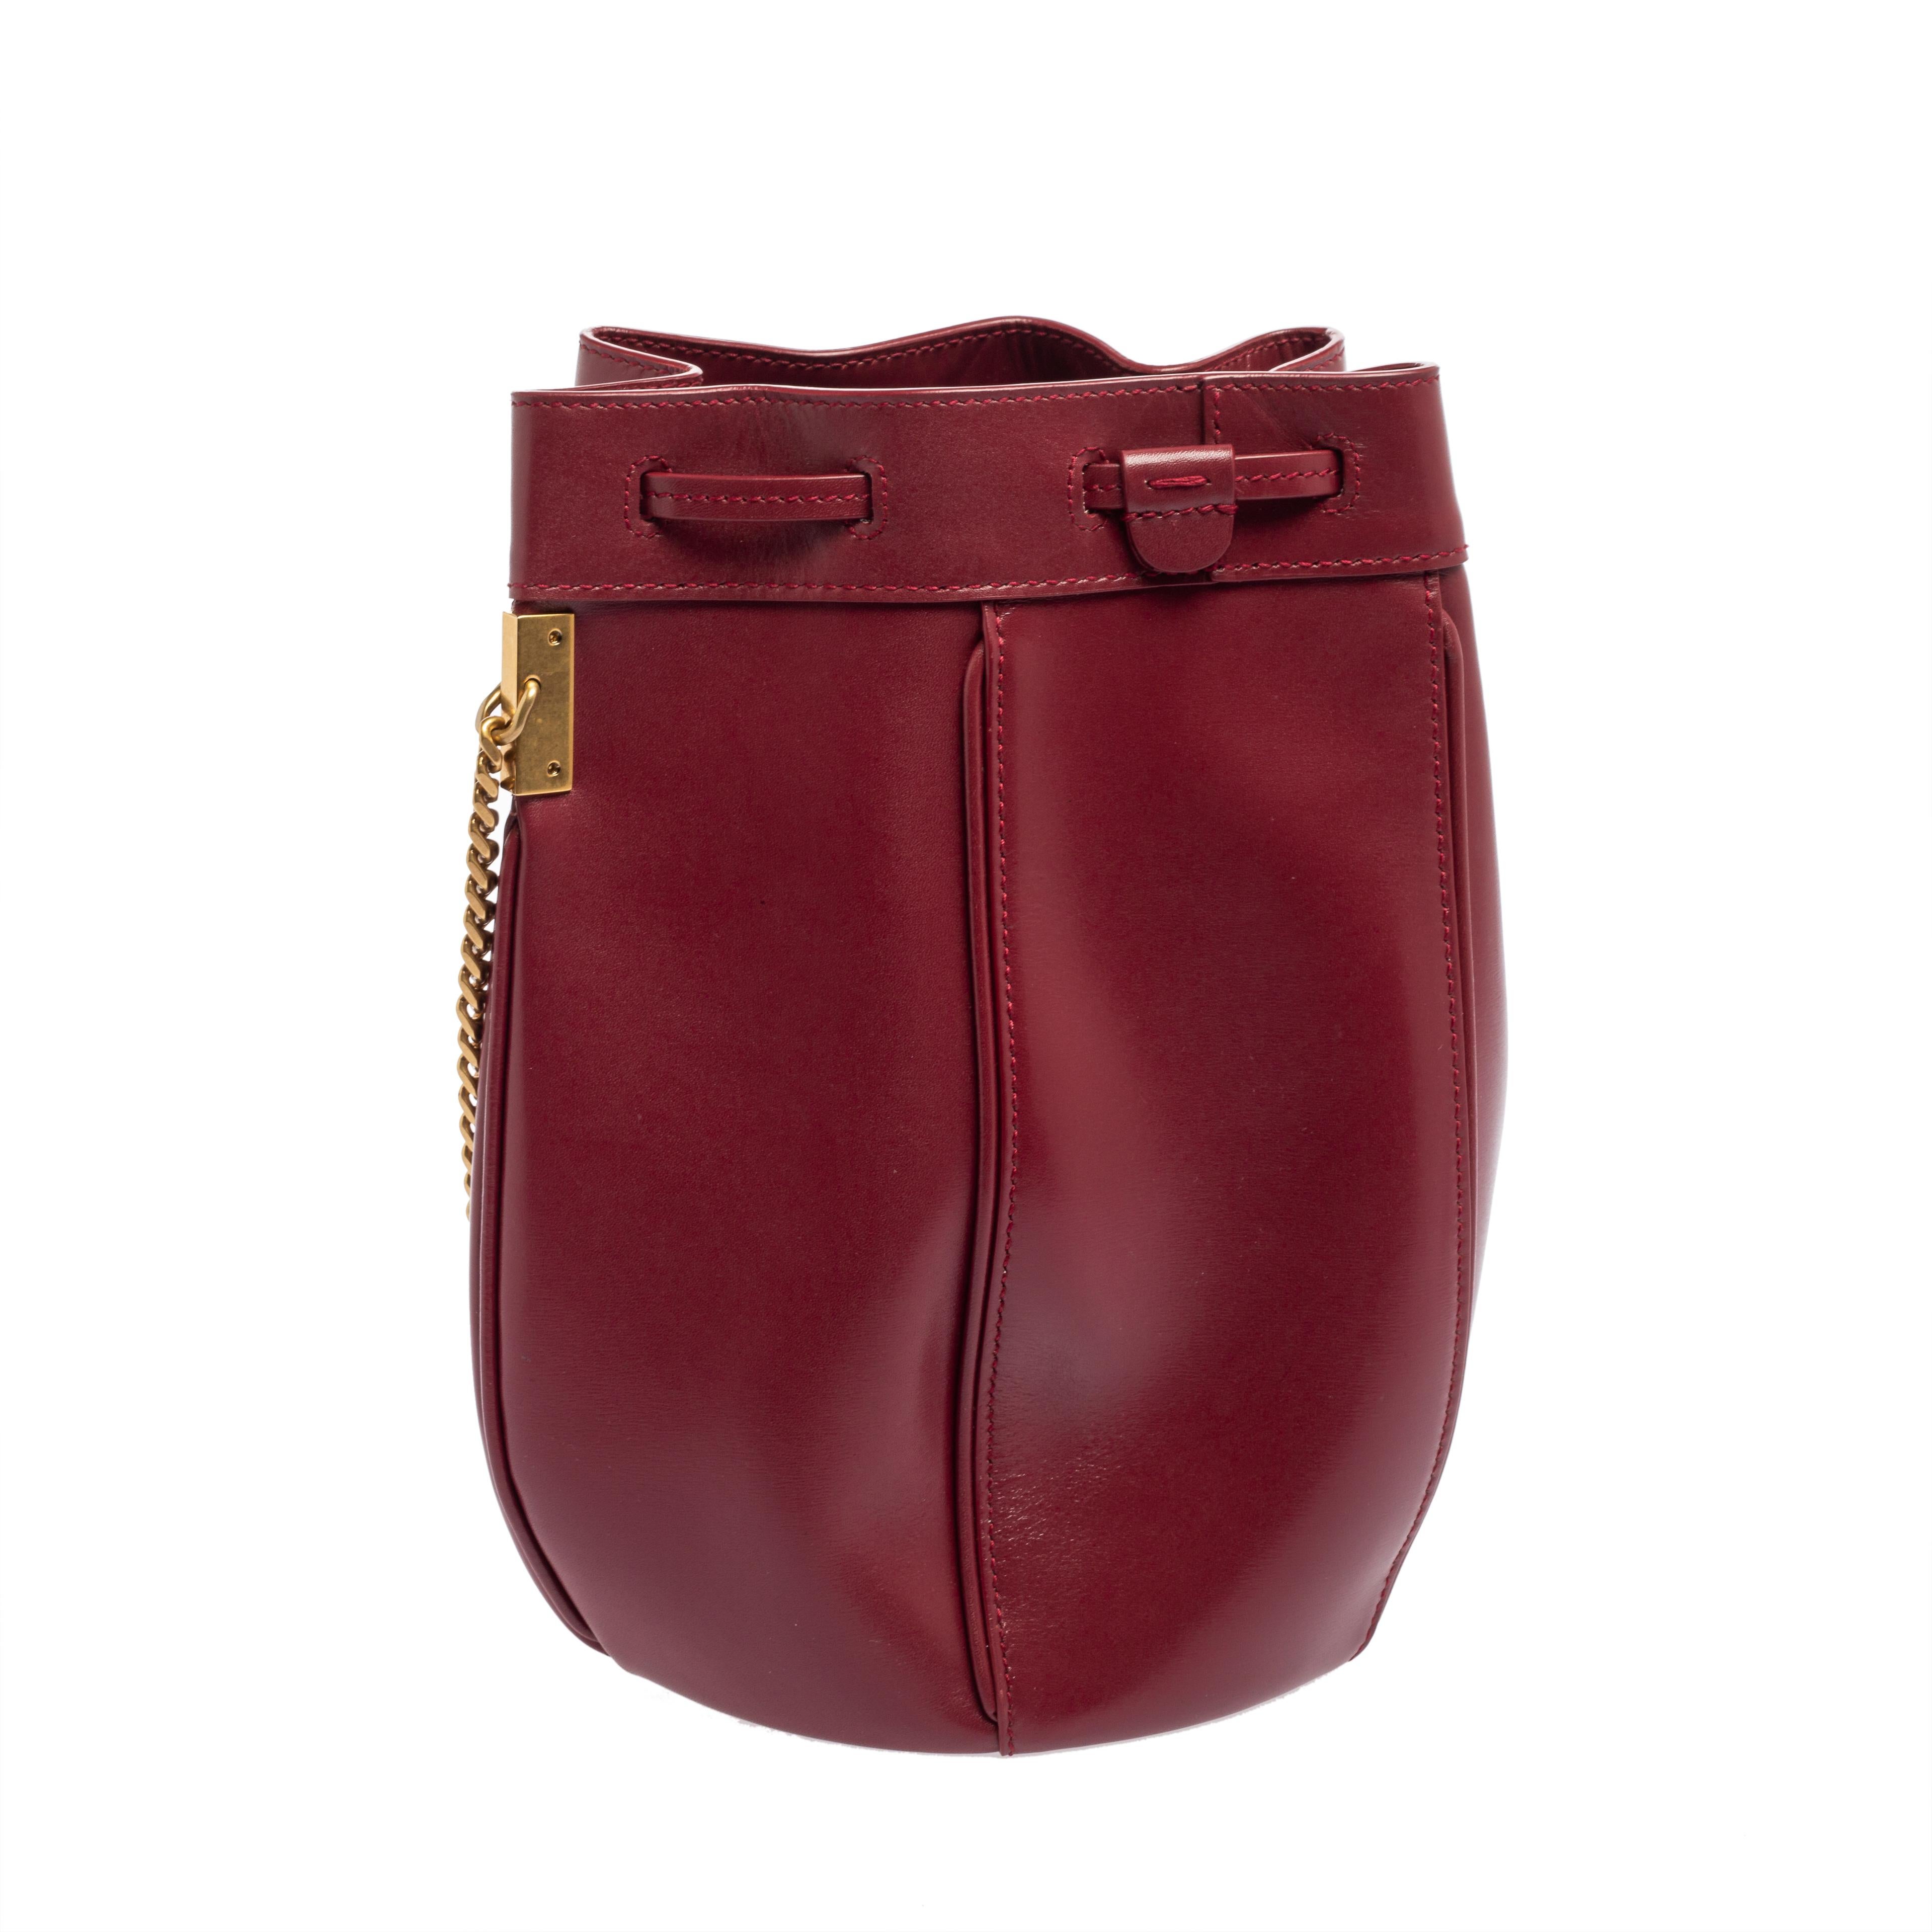 Minimal and chic are some words that describe this Saint Laurent bucket bag! Crafted from red leather, the creation is added with a well-spaced interior, drawstring closure, signature stamp at the front, and a shoulder chain that can be worn across